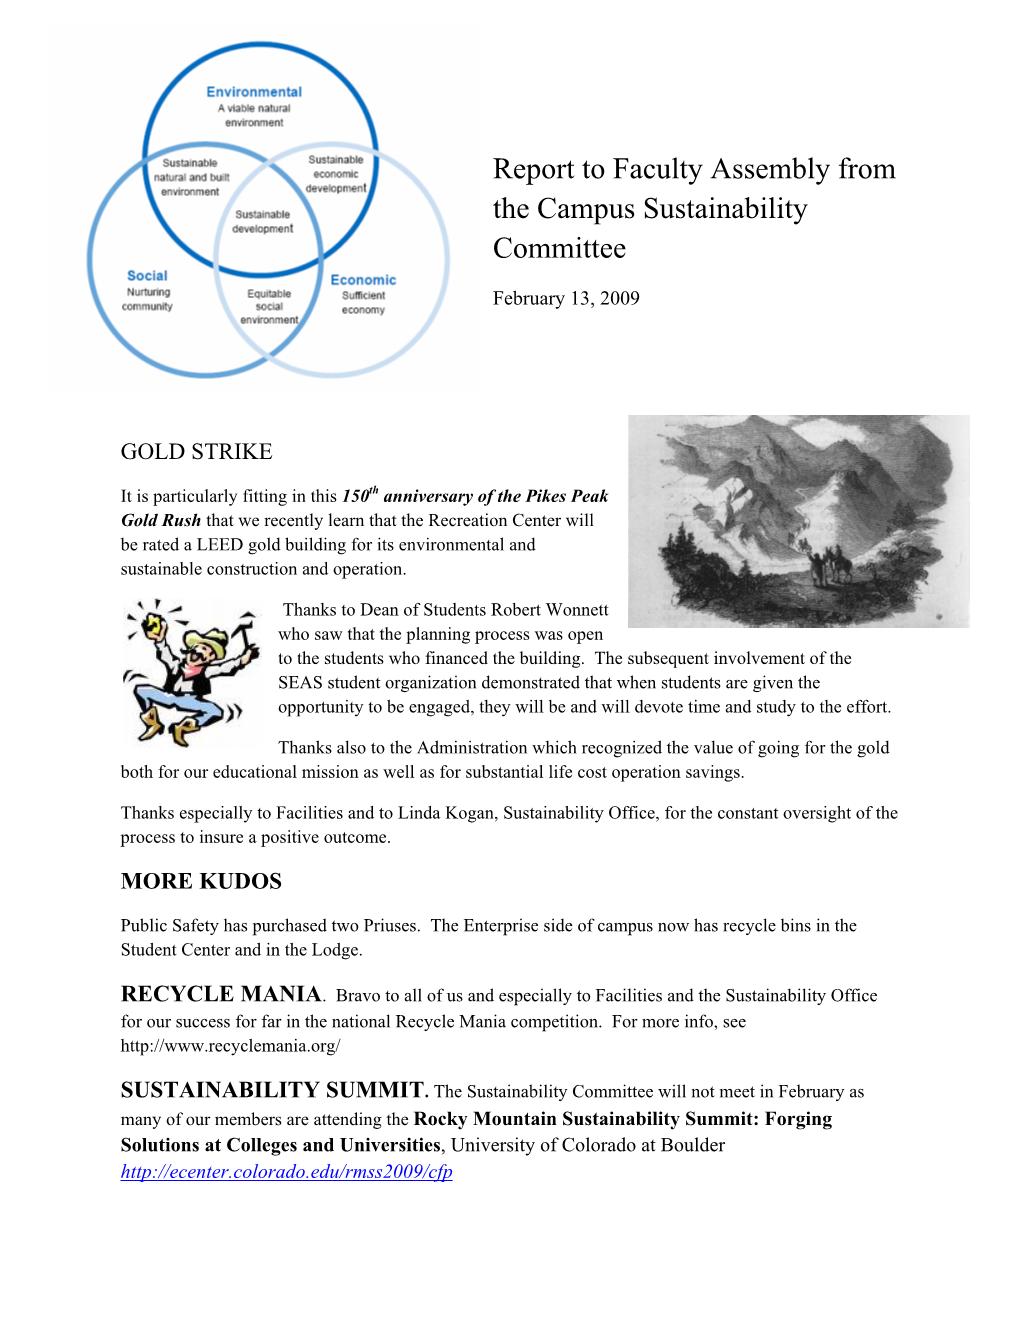 Report to Faculty Assembly from the Campus Sustainability Committee